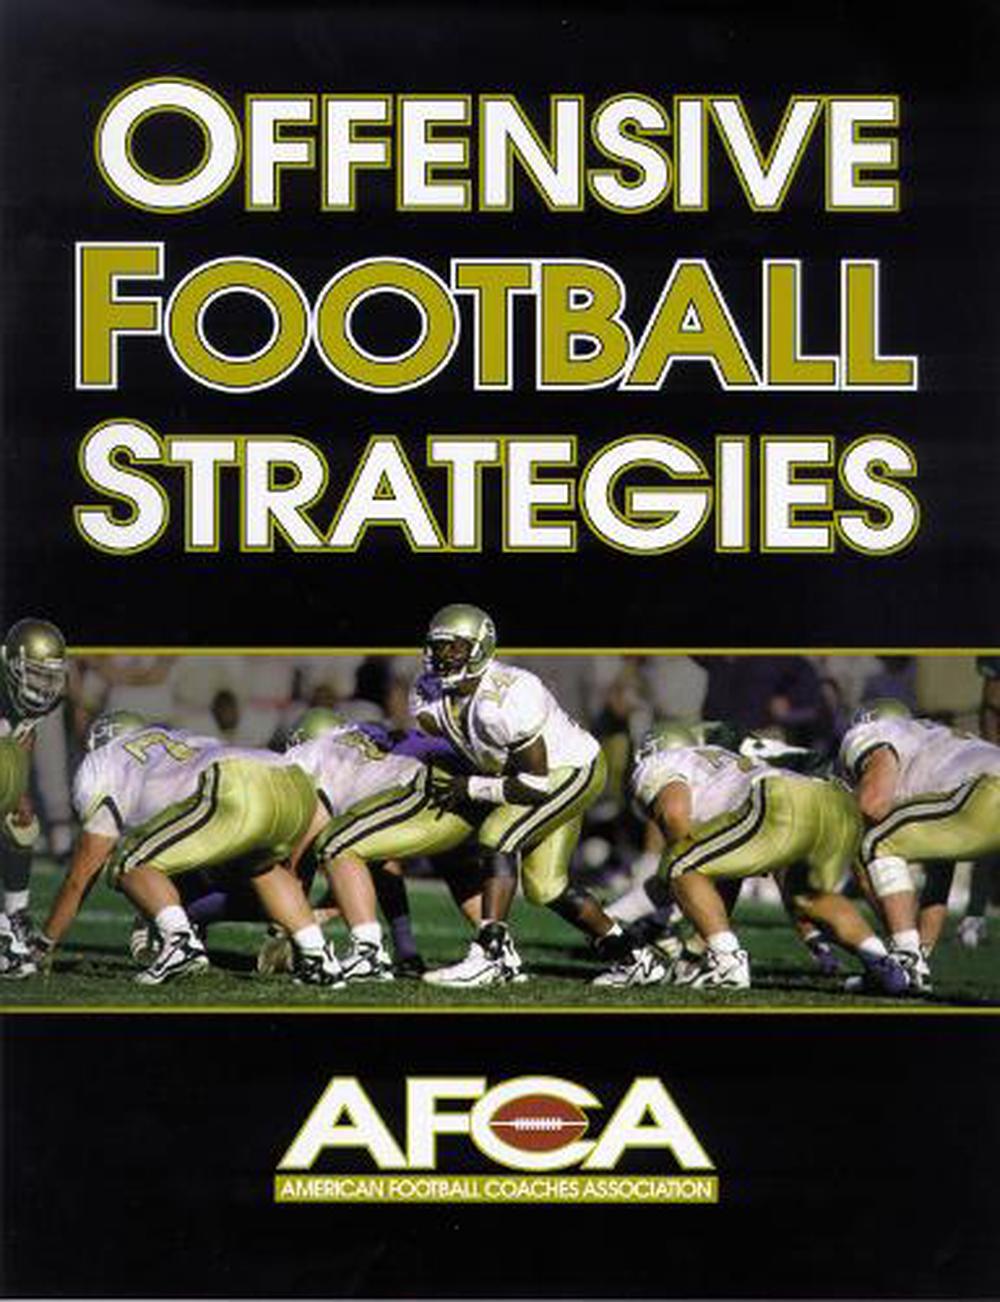 Offensive Football Strategies by American Football Coaches Association